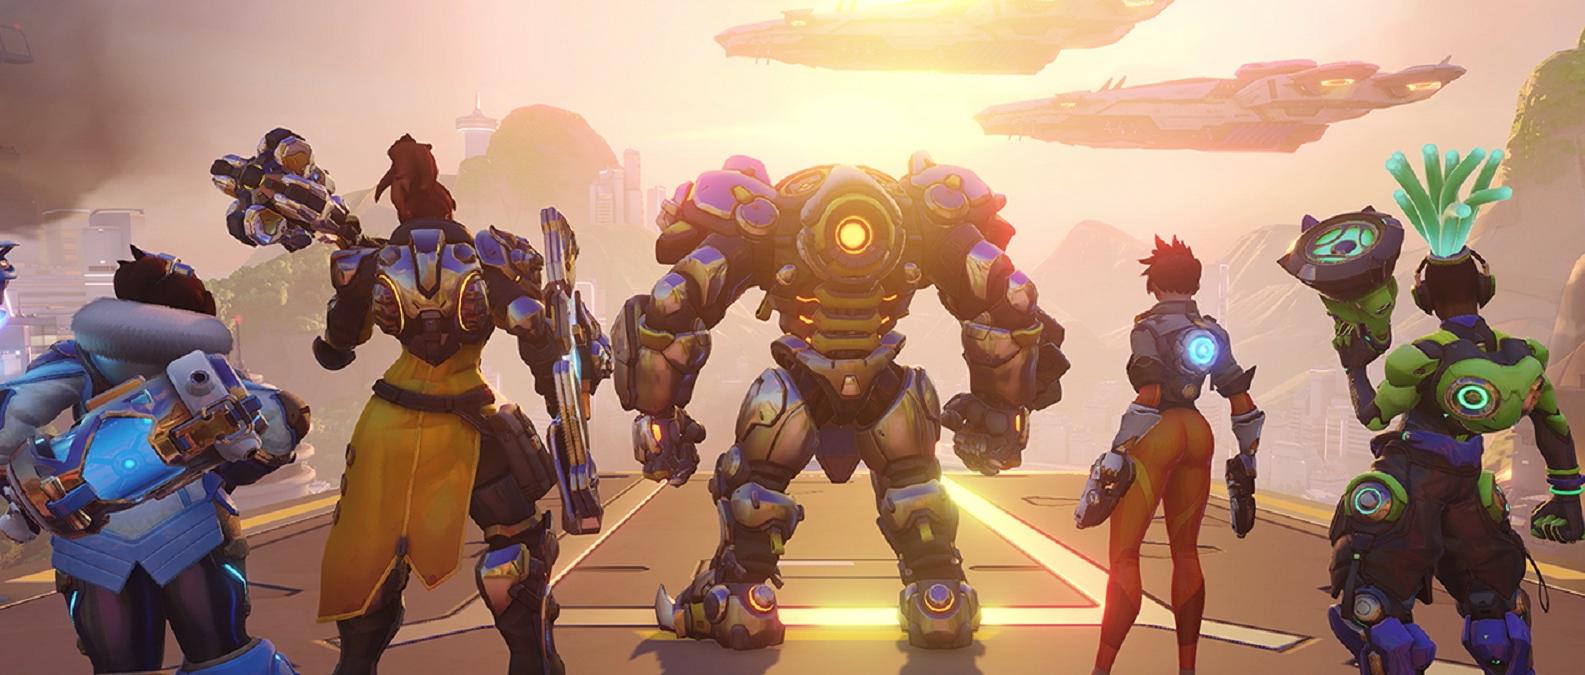 Overwatch 2 fans outraged over an expensive budget of $15 for story missions